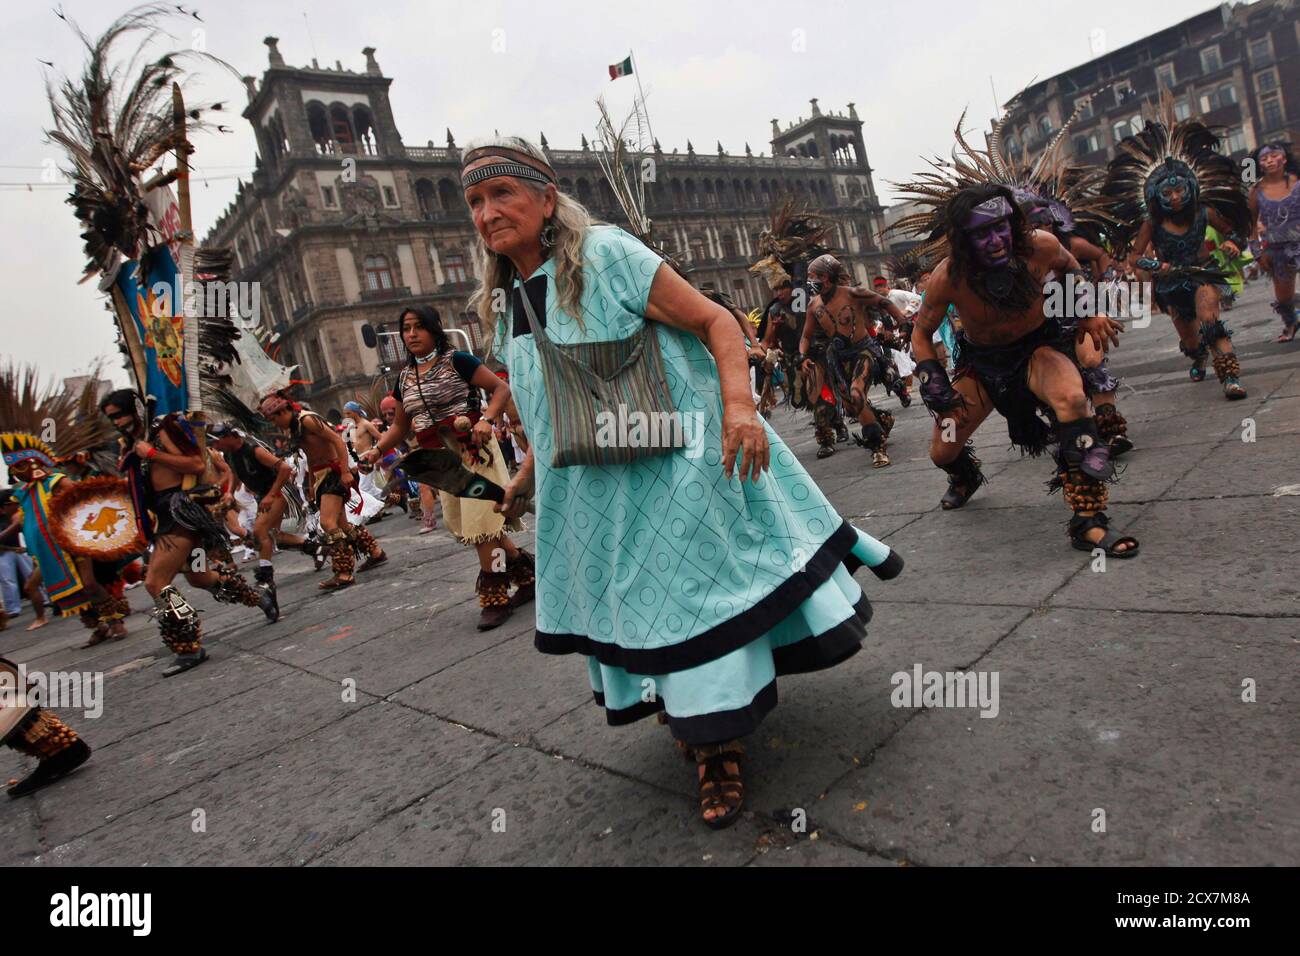 Dancers perform pre-Hispanic dances during the celebration of 687th anniversary of the foundation of Mexico-Tenochtitlan at Zocalo square in Mexico City July 26, 2012. Tenochtitlan, sometimes also known as Mexico Tenochtitlan, was a Nahua altepetl (city-state) that located on an island in Lake Texcoco, in the Valley of Mexico. Founded in 1325, it became the capital of the expanding Aztec Empire in the 15th century. Today the ruins of Tenochtitlan are located in the central part of Mexico City. REUTERS/Edgard Garrido(MEXICO - Tags: ANNIVERSARY SOCIETY) Stock Photo